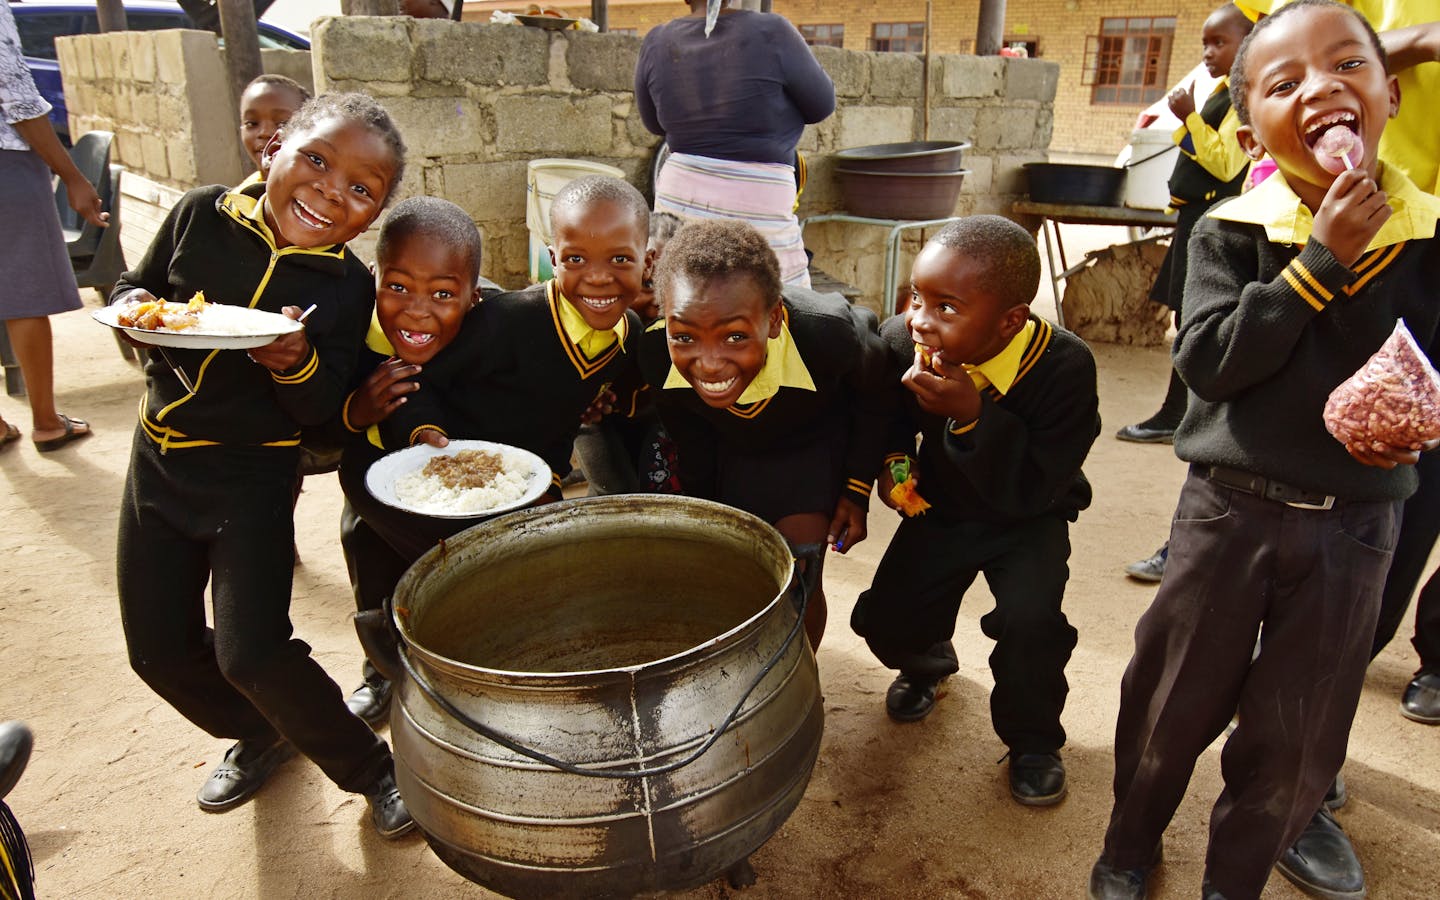 Students at the Shiviti School, built with the support of the Buffelshoek Trust in Utah village